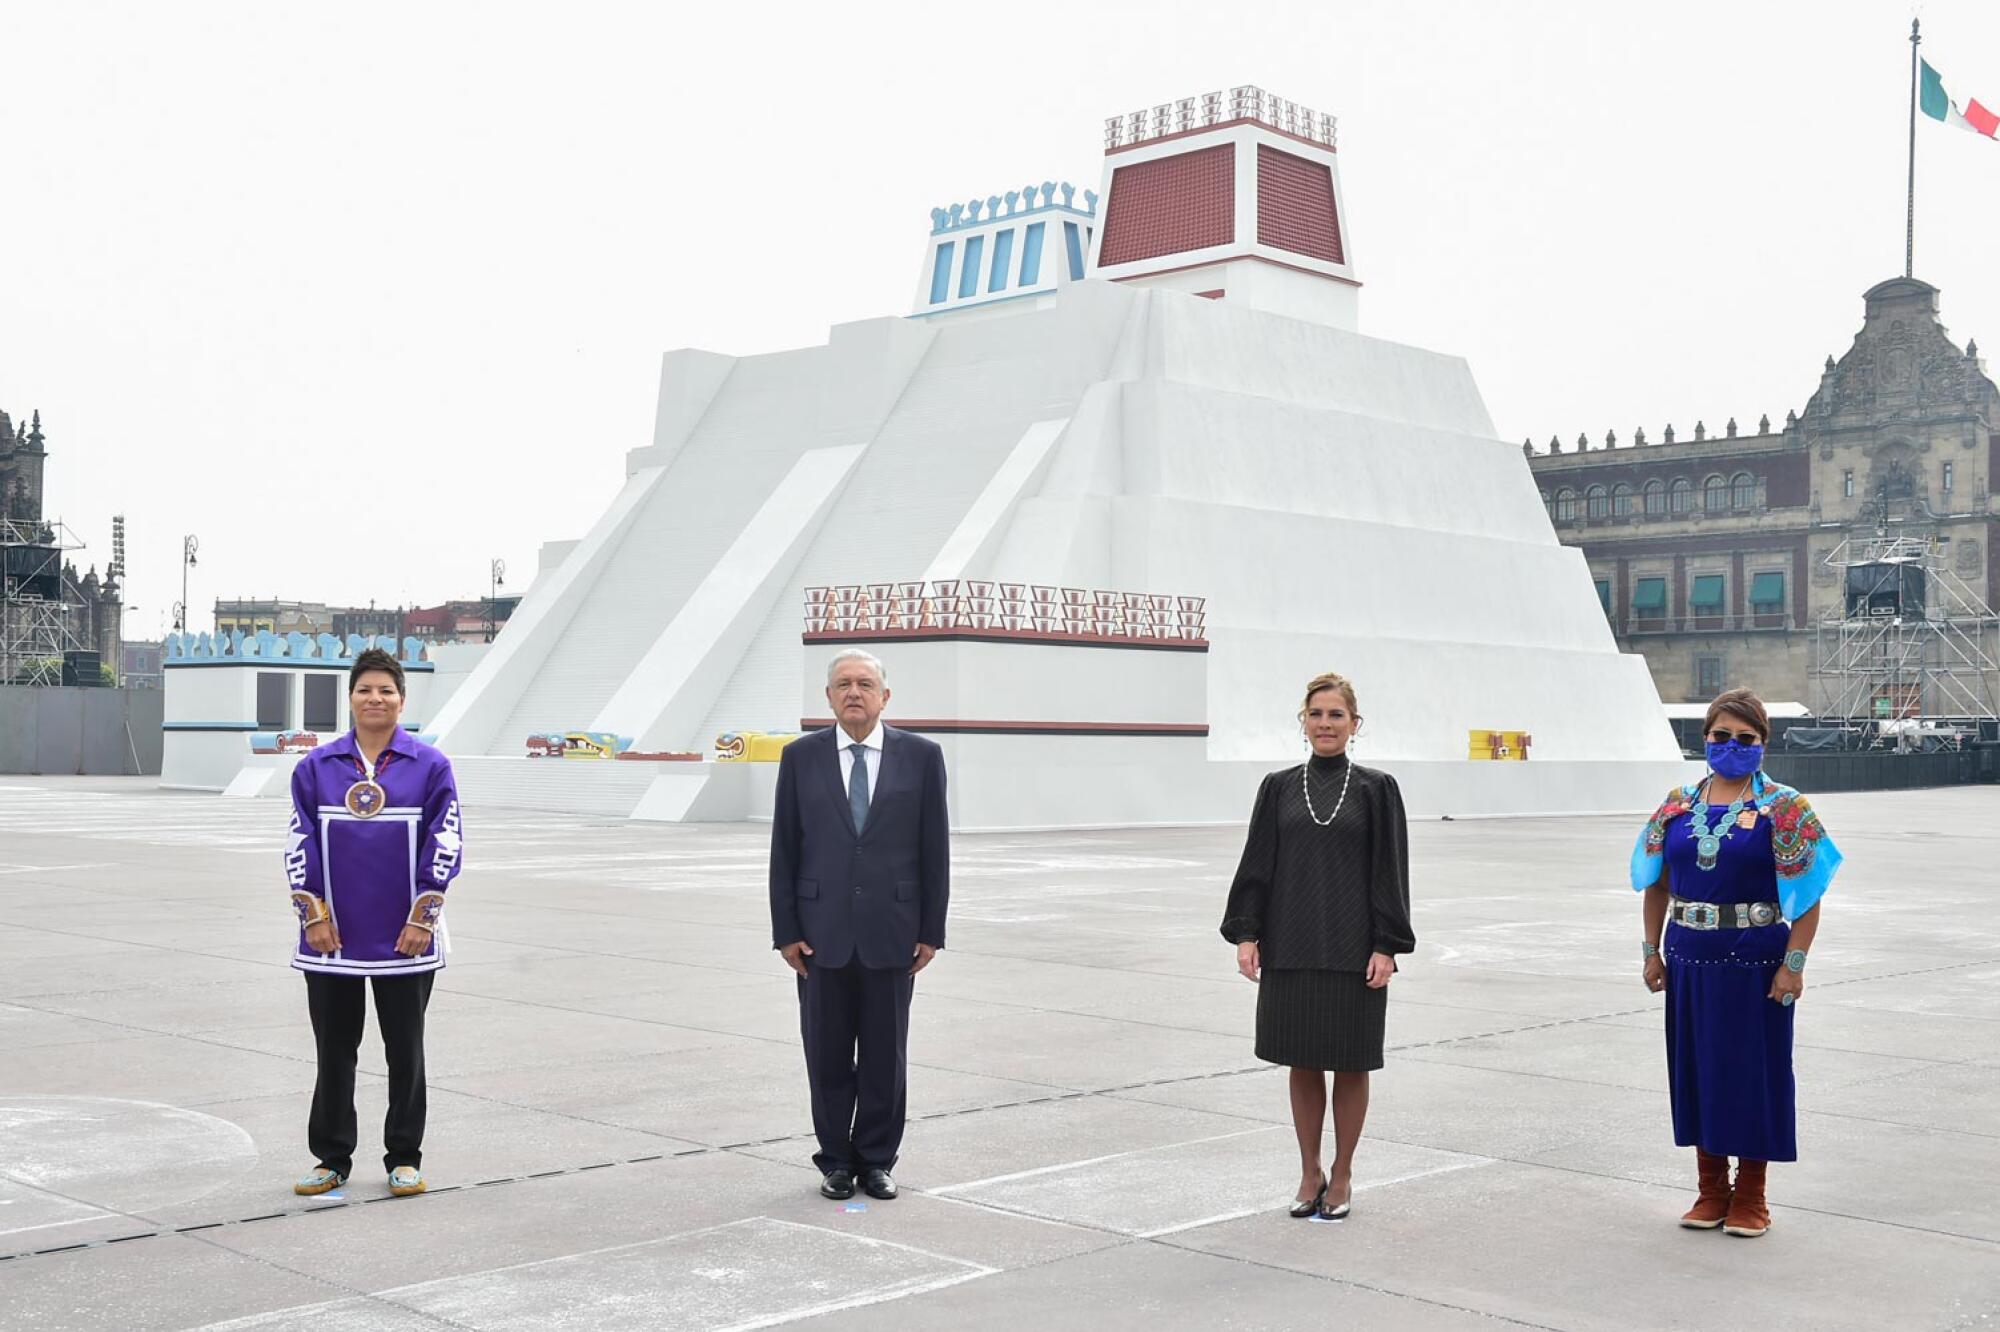 President Andrés Manuel López Obrador and dignitaries stand in front of a replica of the Templo Mayor in Mexico City.